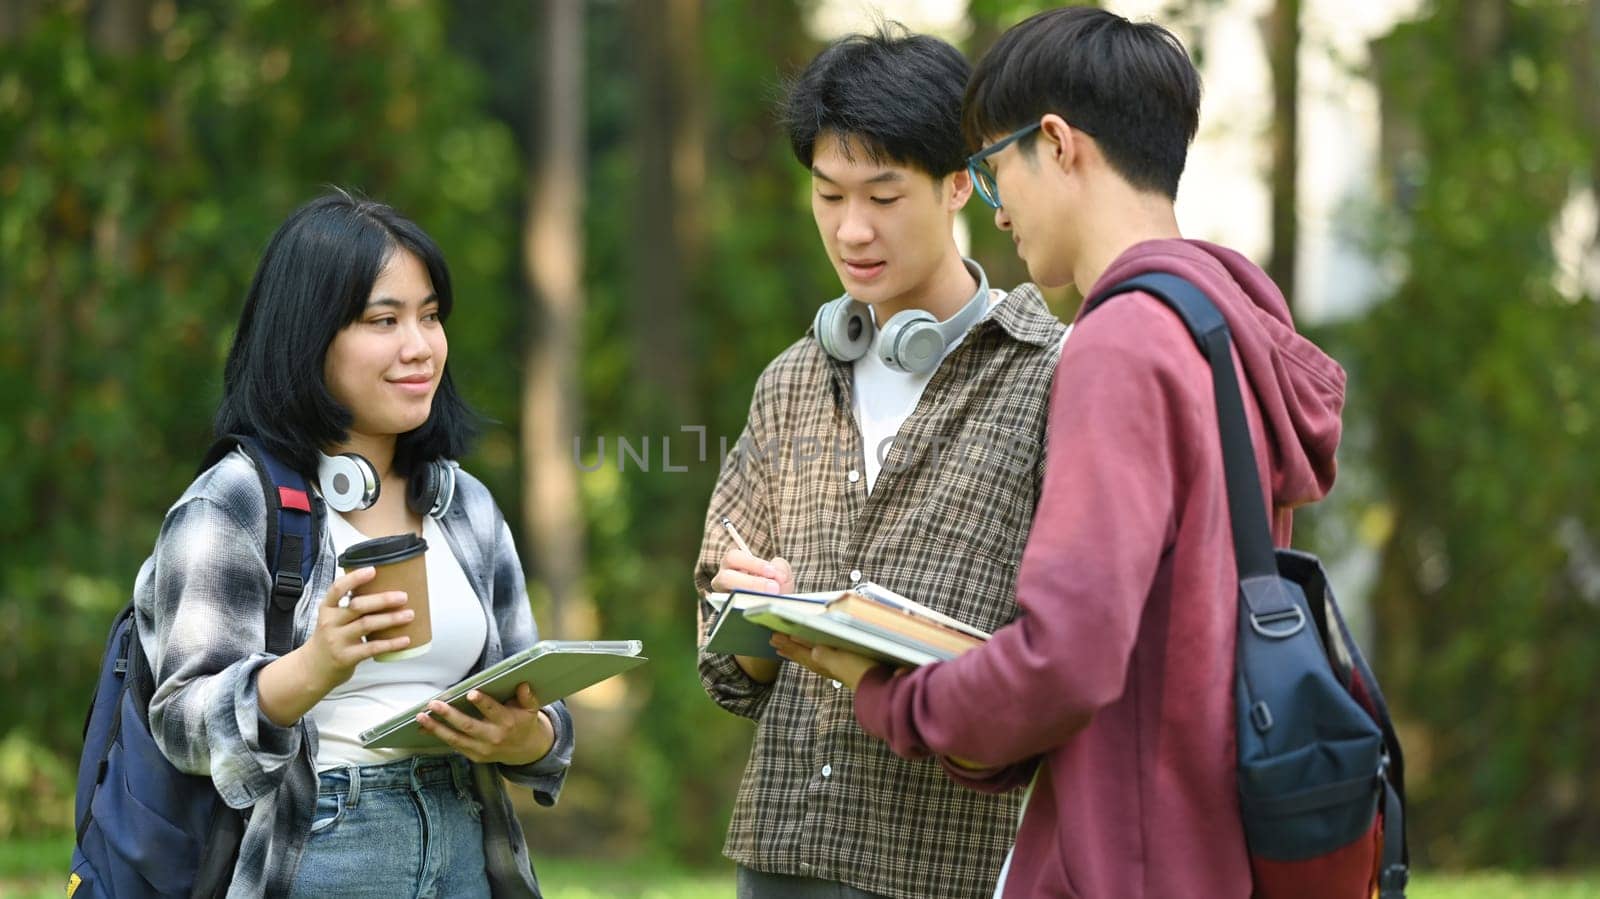 Group of students are talking to each other after classes while walking outdoors in university. Education and youth lifestyle concept.